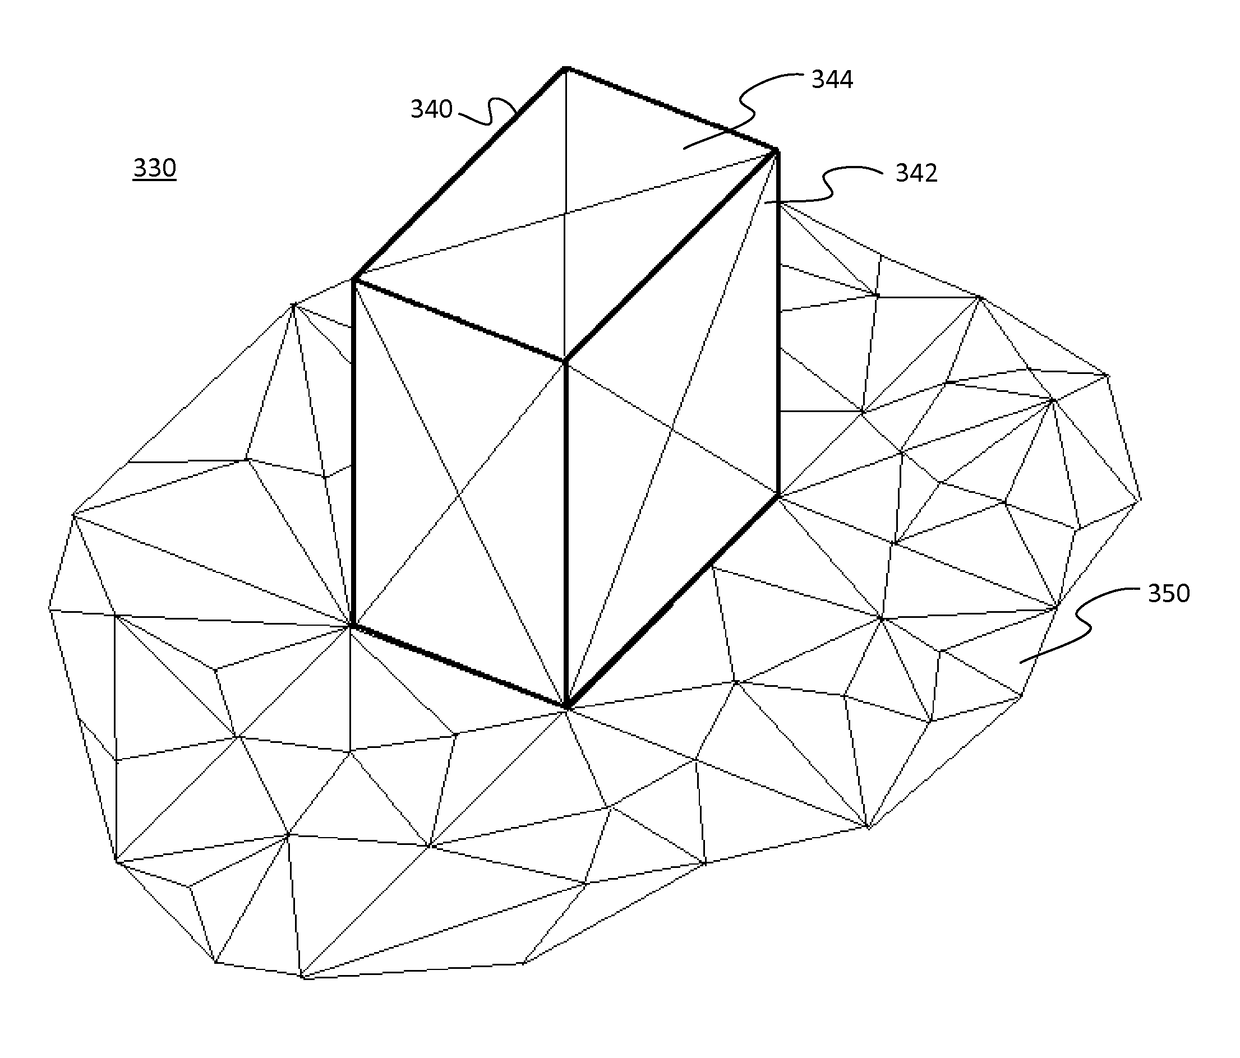 Structure model segmentation from a three dimensional surface